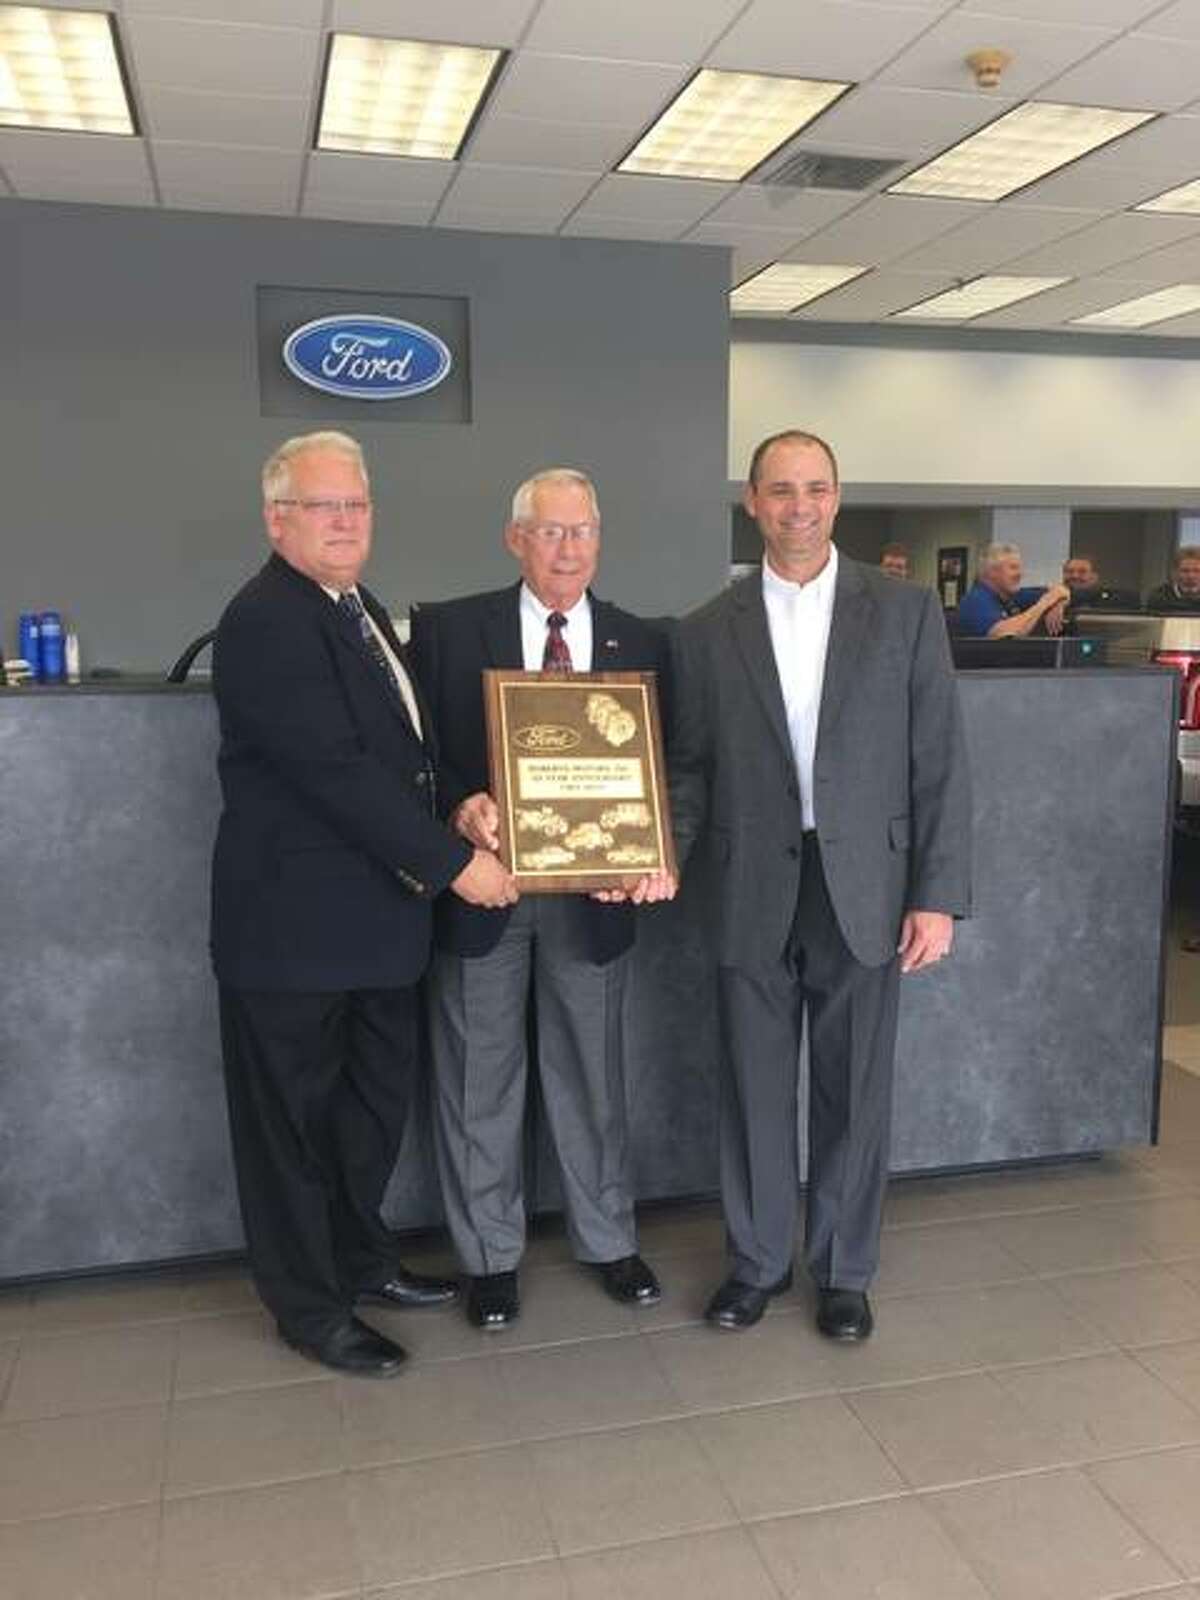 Sam Roberts, center, is one of a select group of 47 dealer nominees from across the country who will be honored at the National Automobile Dealers Association’s 2018 NADA Show in Las Vegas, Nevada. Roberts Motors recently celebrated 50 years in business. The business, which specializes in Ford vehicles, received a plaque to commemorate the occasion. Also shown are, from left, regional manager Kevin Klossner and general manager John Roberts.